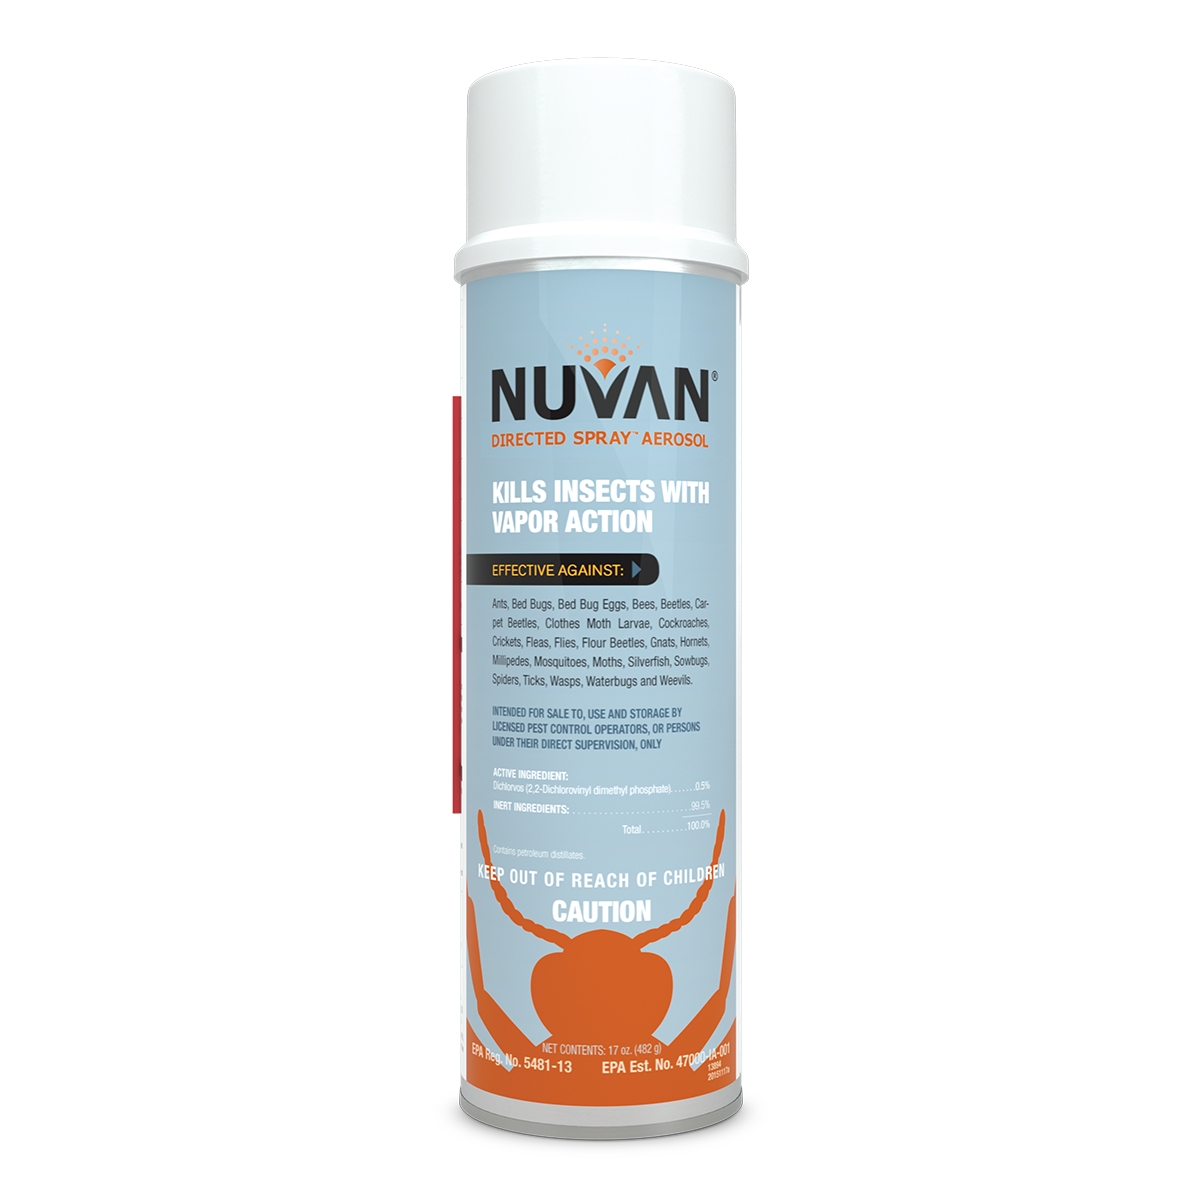 NUVAN® DIRECTED SPRAY AEROSOLProduct Image